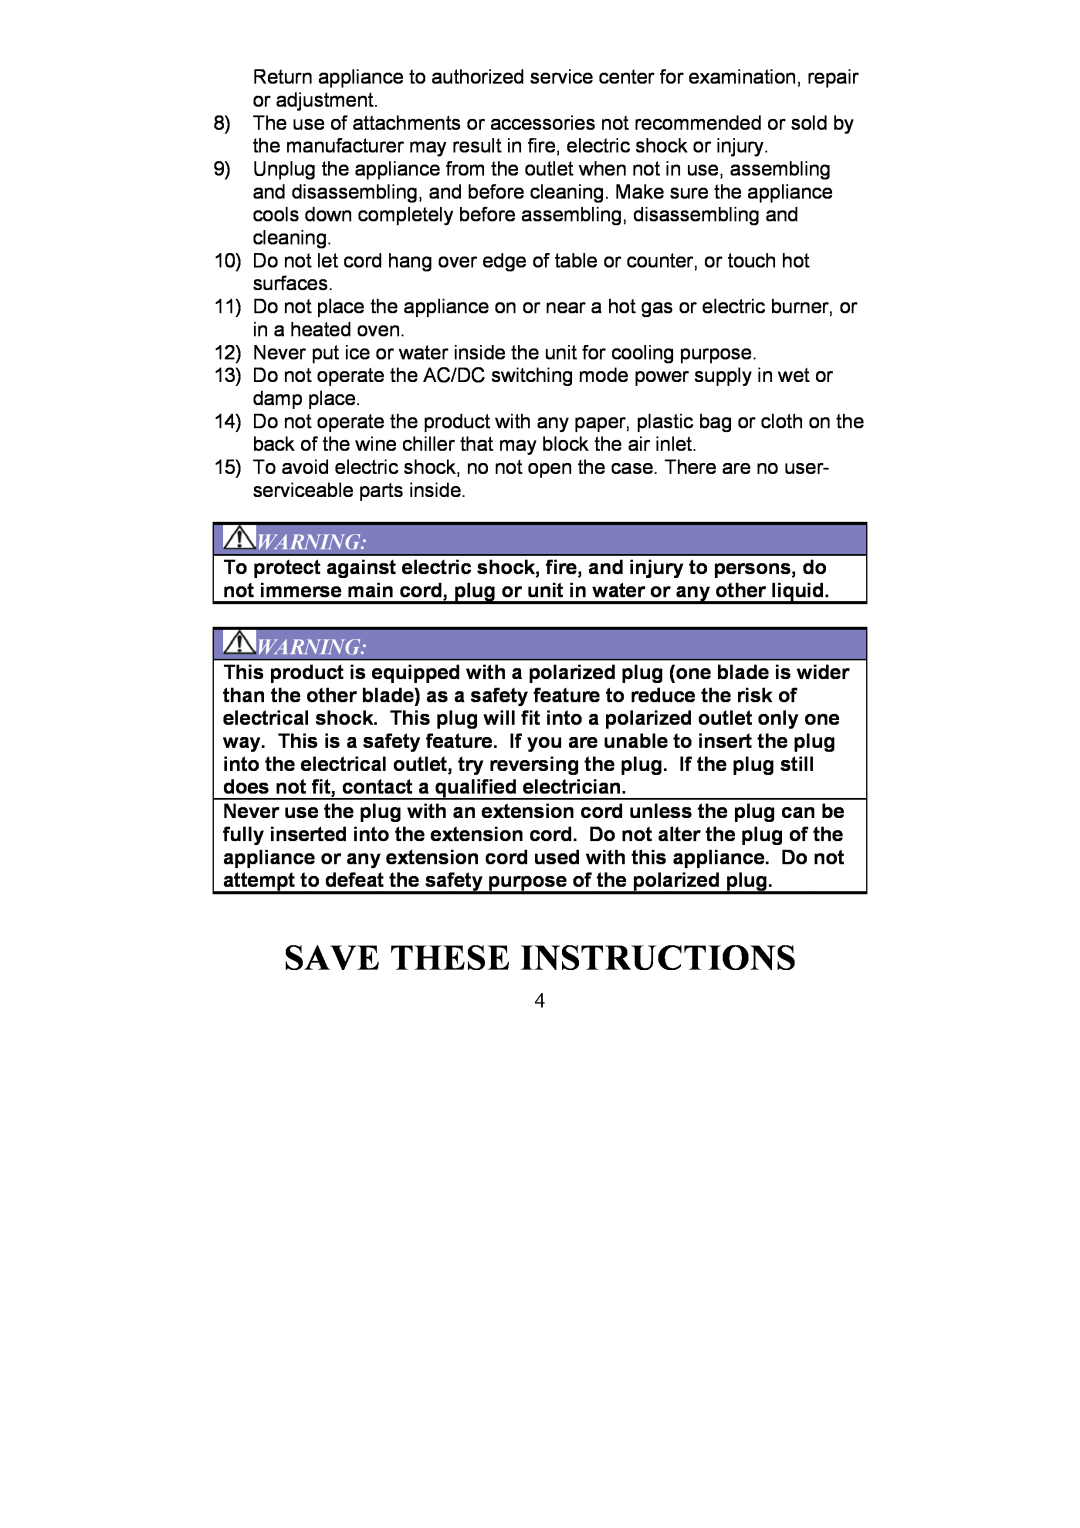 Magic Chef EWWC2SI manual Save These Instructions 